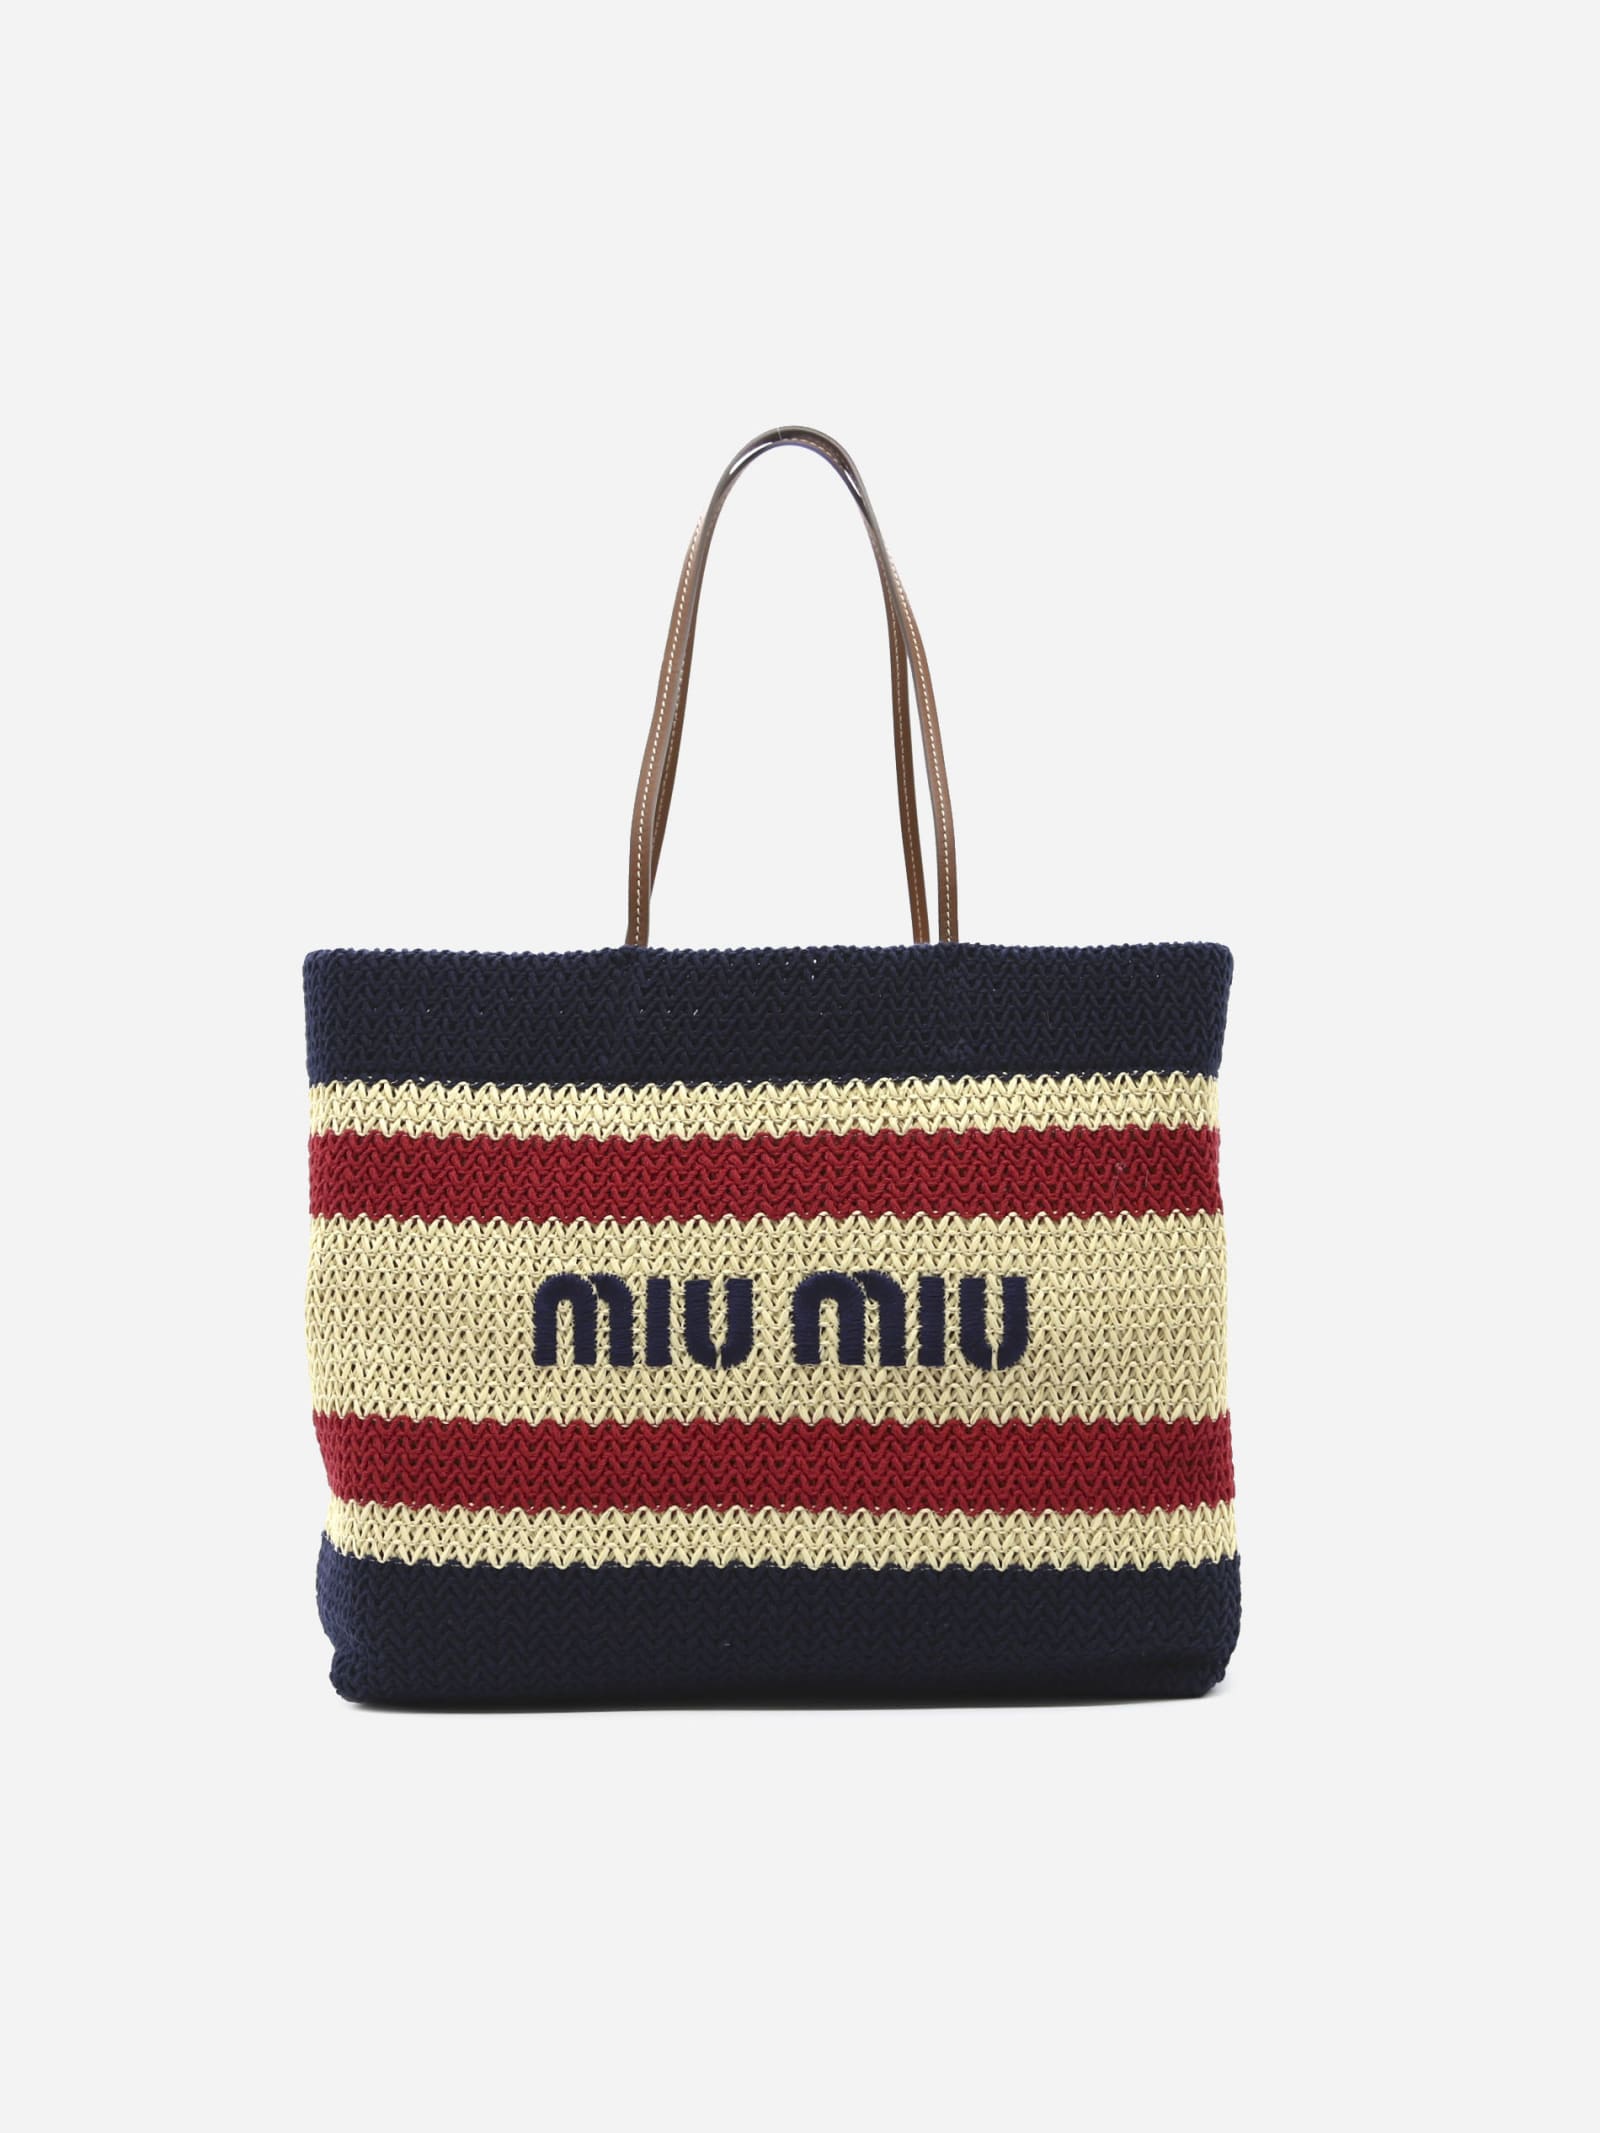 Miu Miu Shoulder Bag In Raffia And Cotton With Contrasting Embroidered Logo